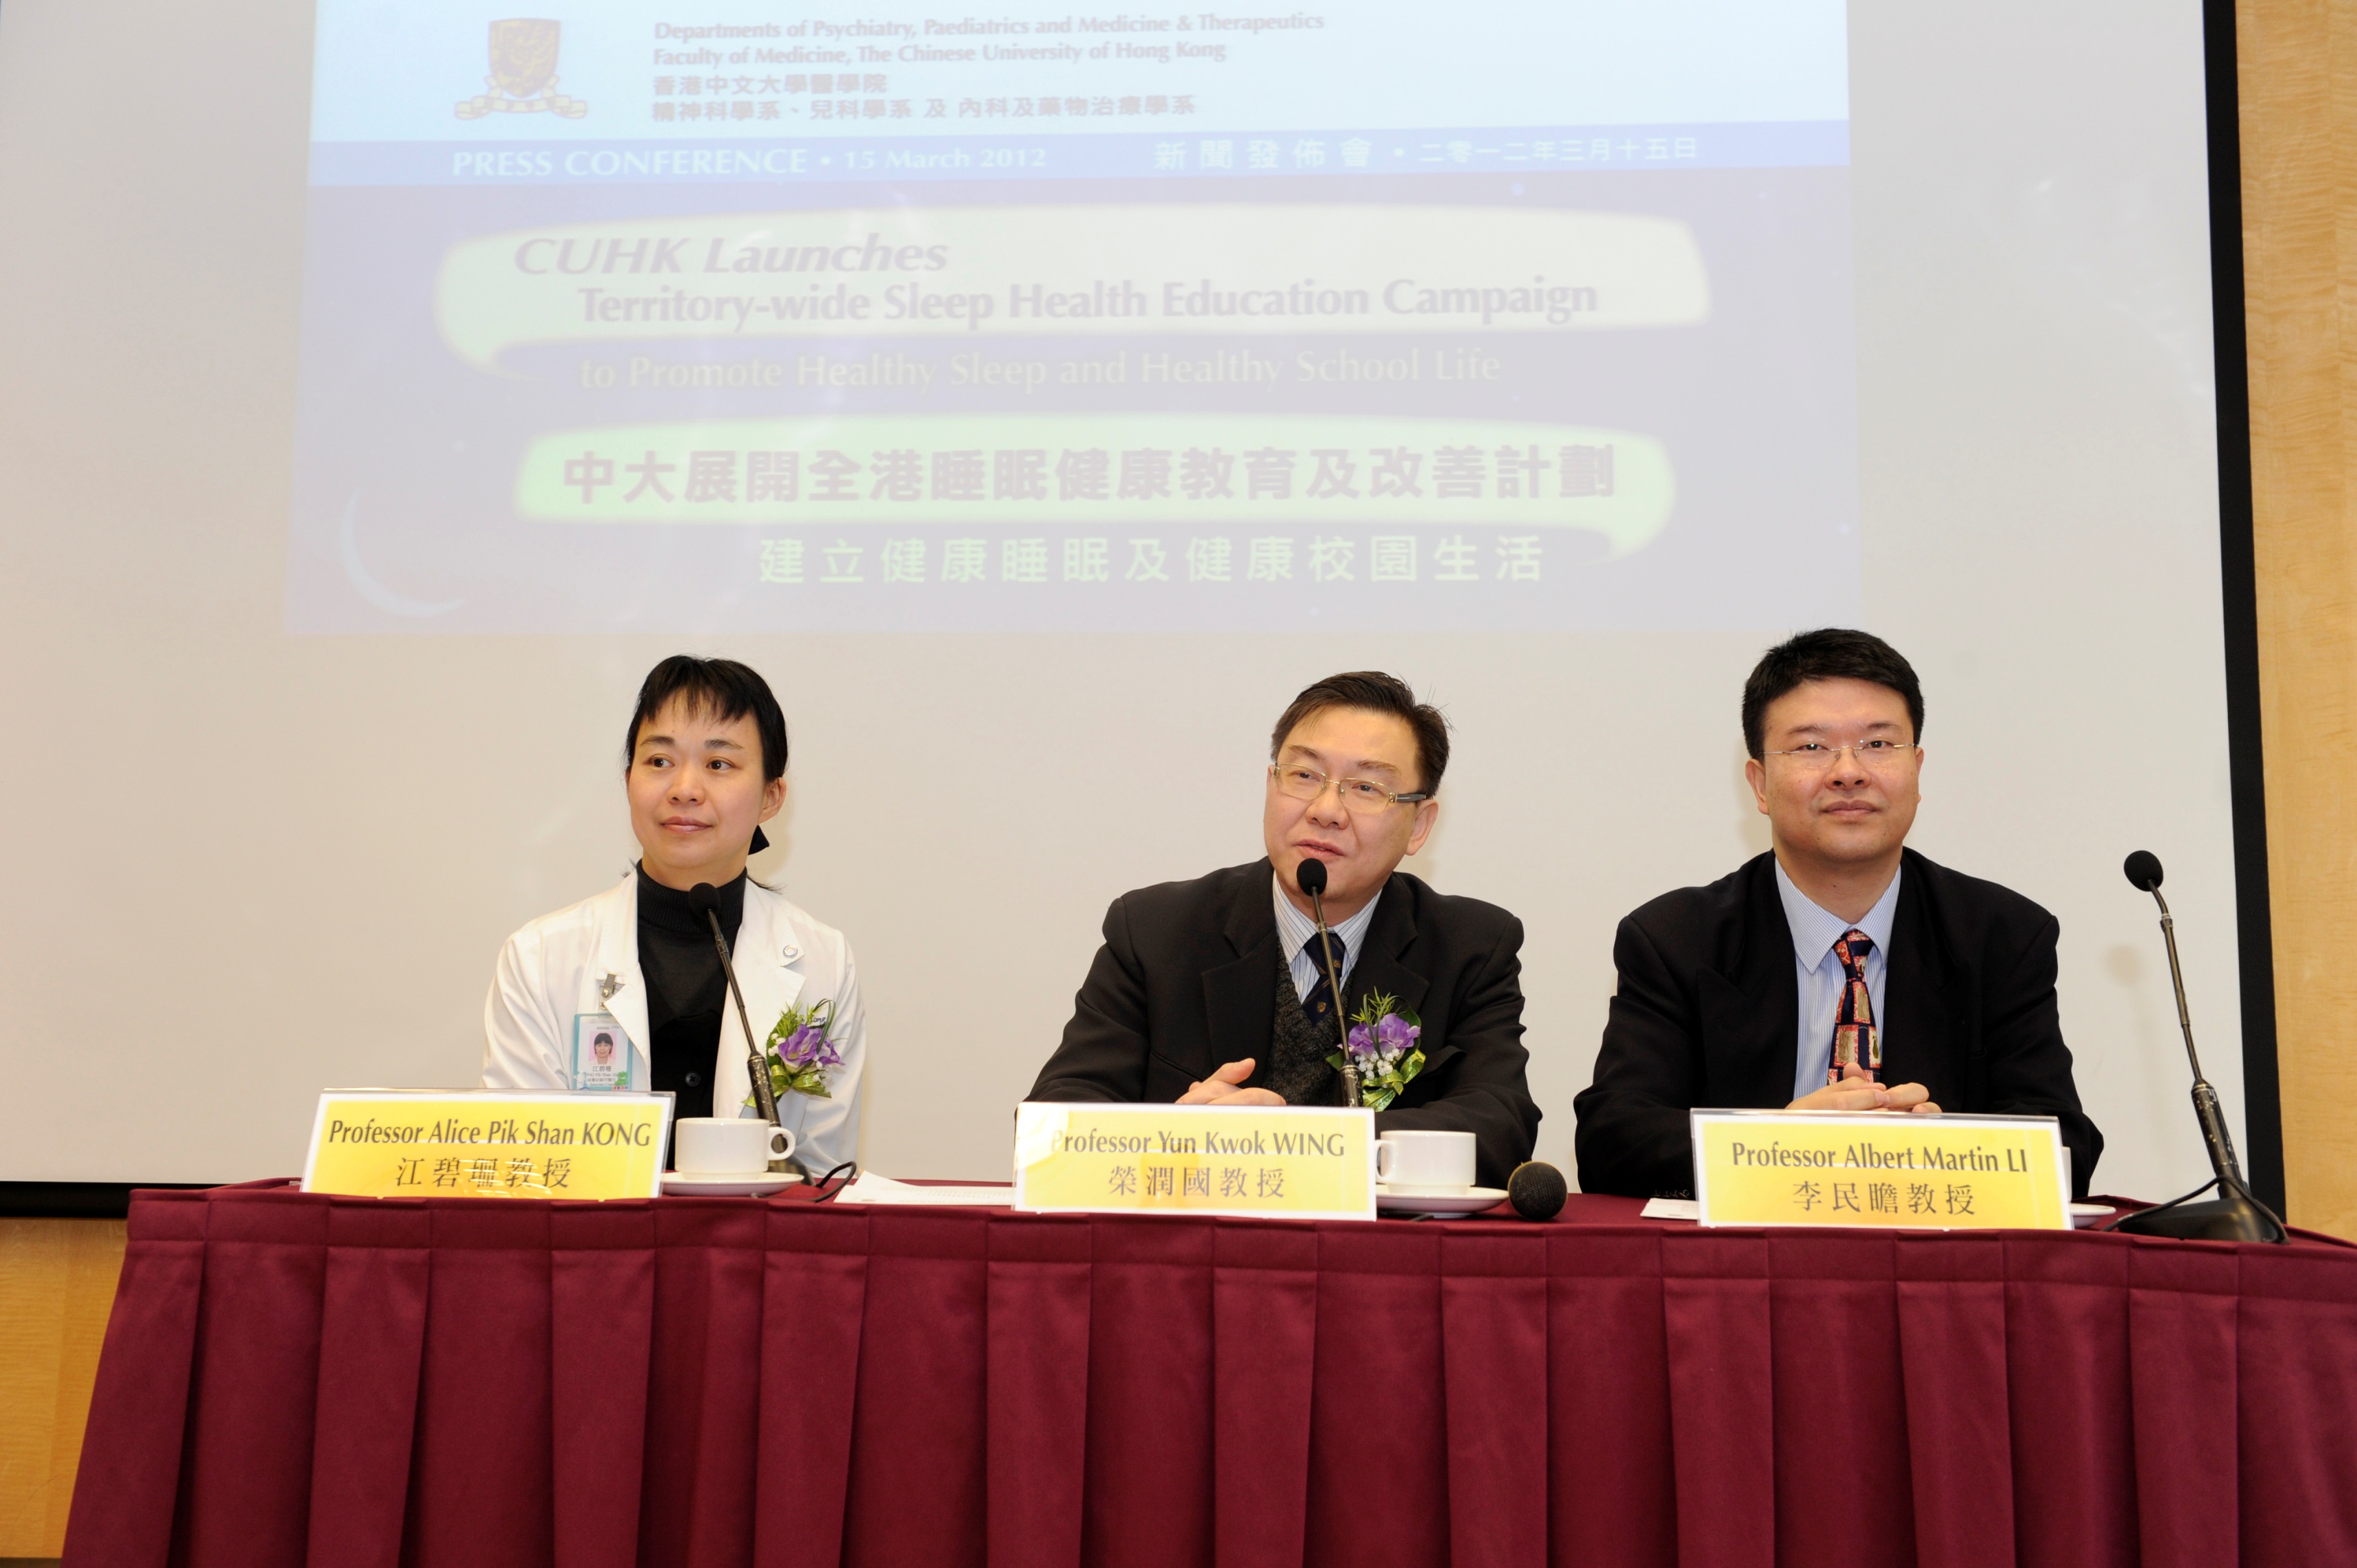 (From left) Prof. Alice Pik Shan KONG, Associate Professor, Division of Endocrinology and Diabetes, Department of Medicine and Therapeutics; Prof. Yun Kwok WING, Professor, Department of Psychiatry and Prof. Albert Martin LI, Professor, Department of Paediatrics, CUHK explained how the territory-wide Sleep Health Education and Intervention Campaign in local primary and secondary schools promotes healthy sleeping habits among students